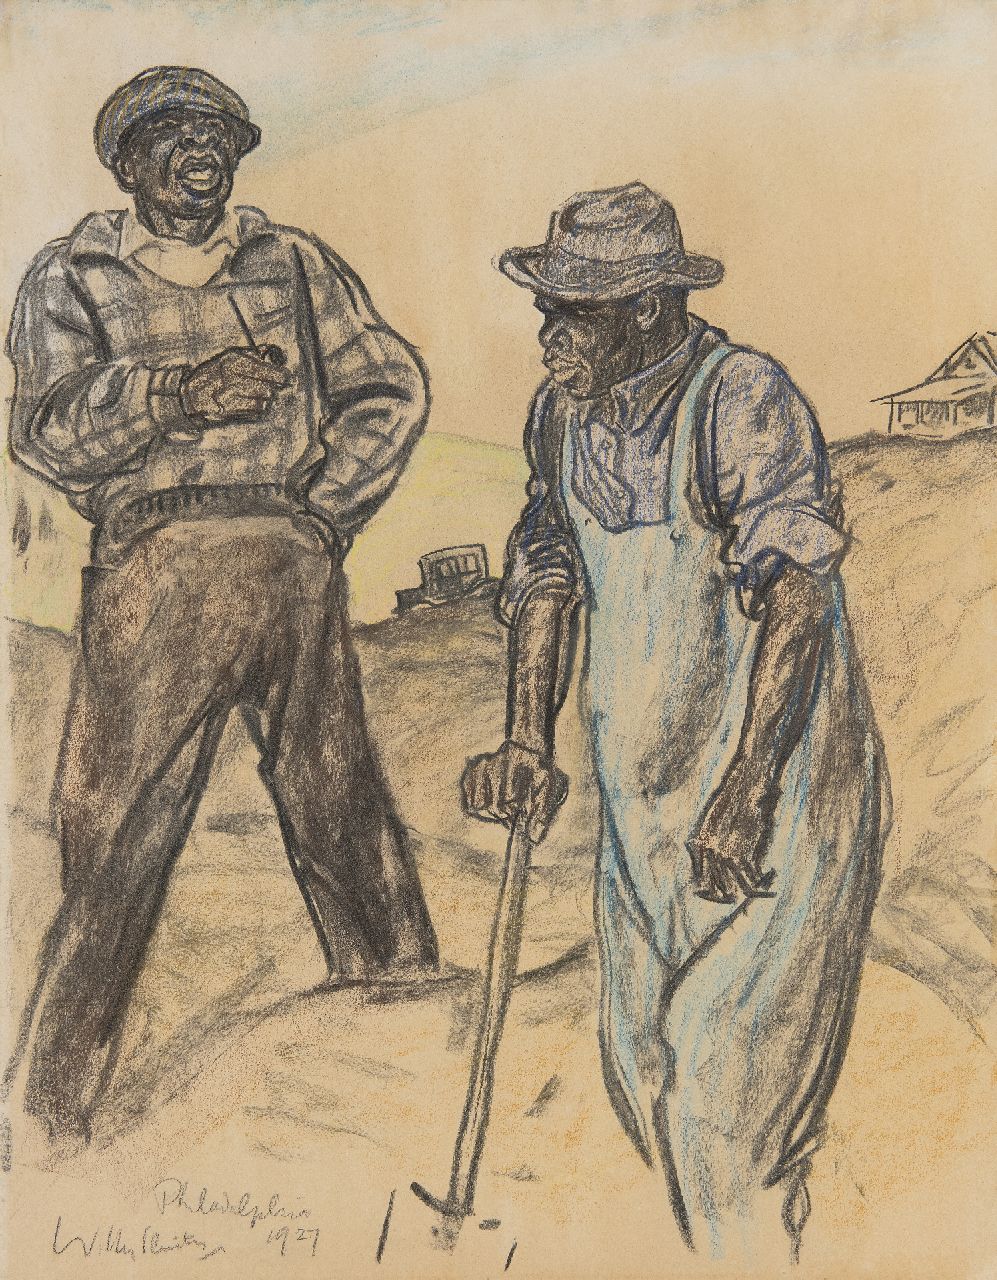 Sluiter J.W.  | Jan Willem 'Willy' Sluiter | Watercolours and drawings offered for sale | Diggers, Philadelpia, drawing on paper 46.6 x 36.3 cm, signed l.l. and dated 1927